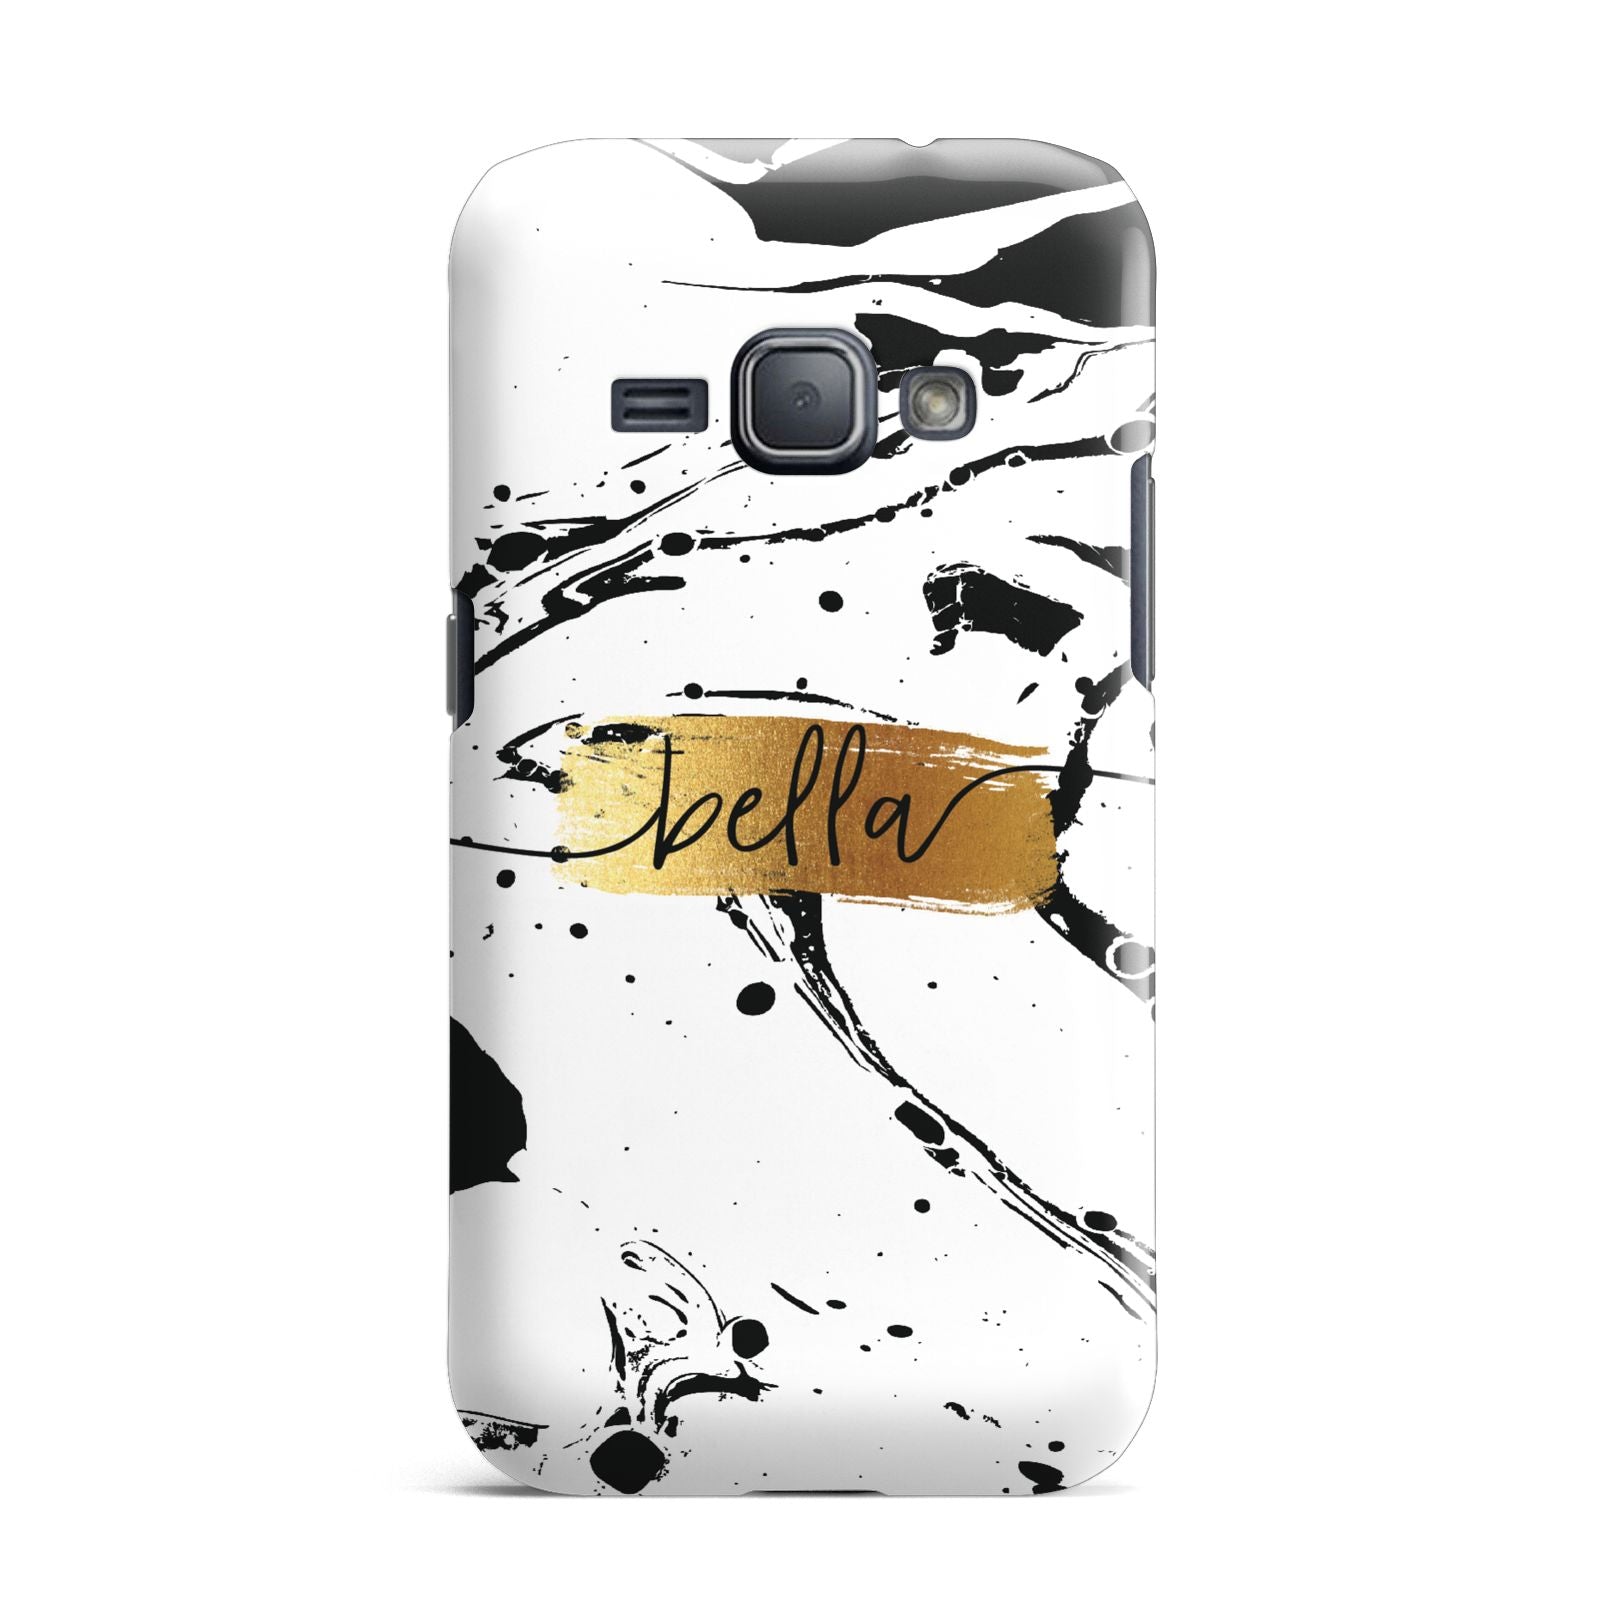 Personalised White Gold Swirl Marble Samsung Galaxy J1 2016 Case